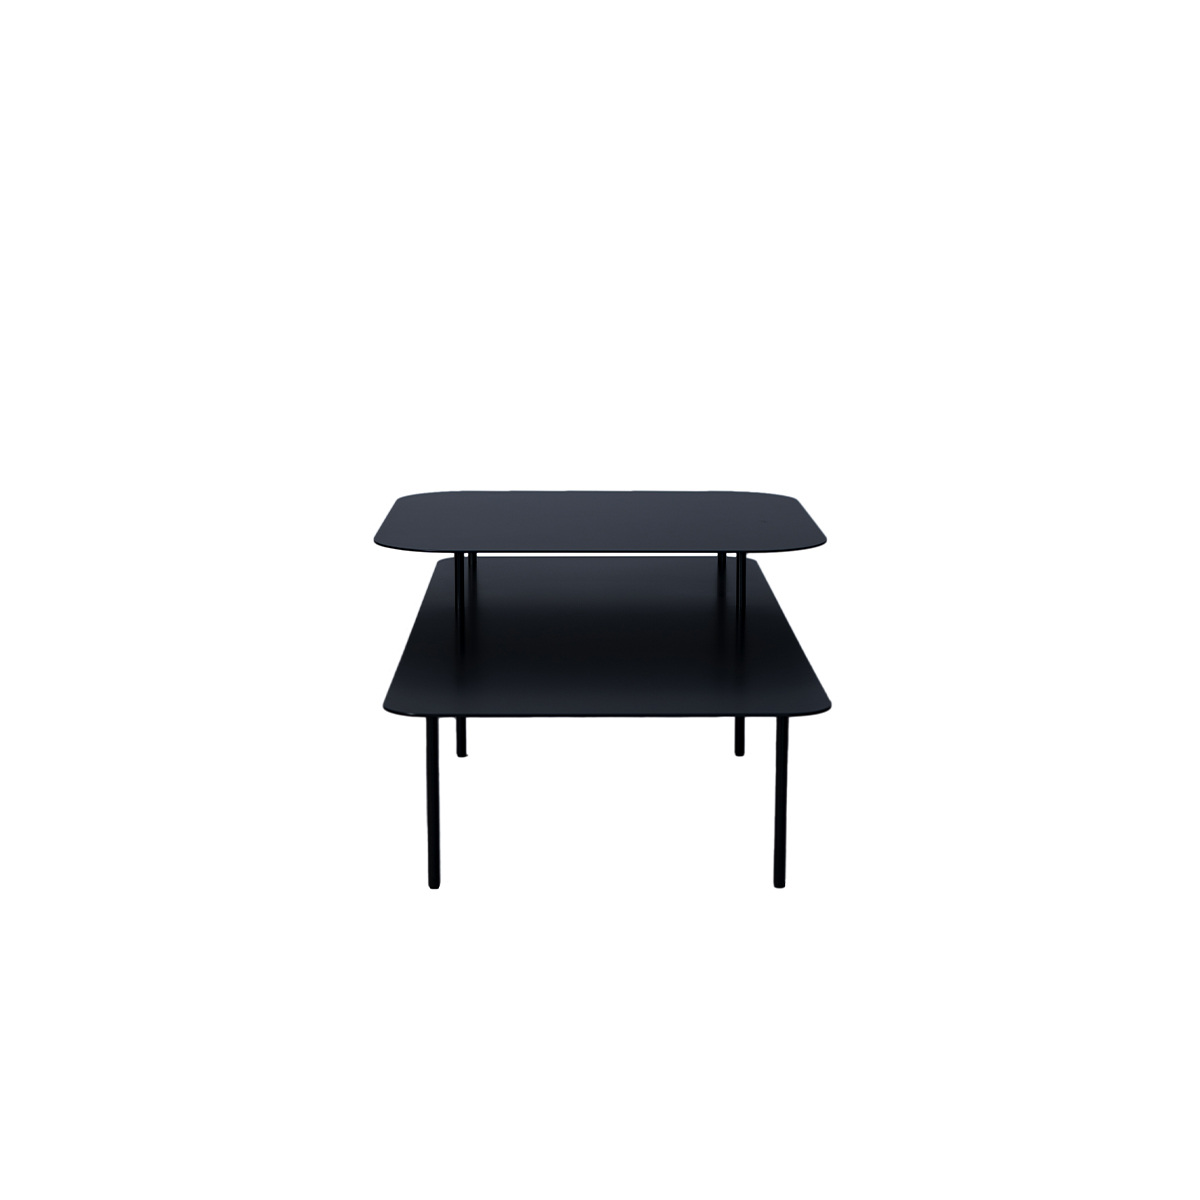 Coffee Table Tokyo Offset Tabletop, Black - L150 x W80 x H40 cm - Powder coated steel - image 2